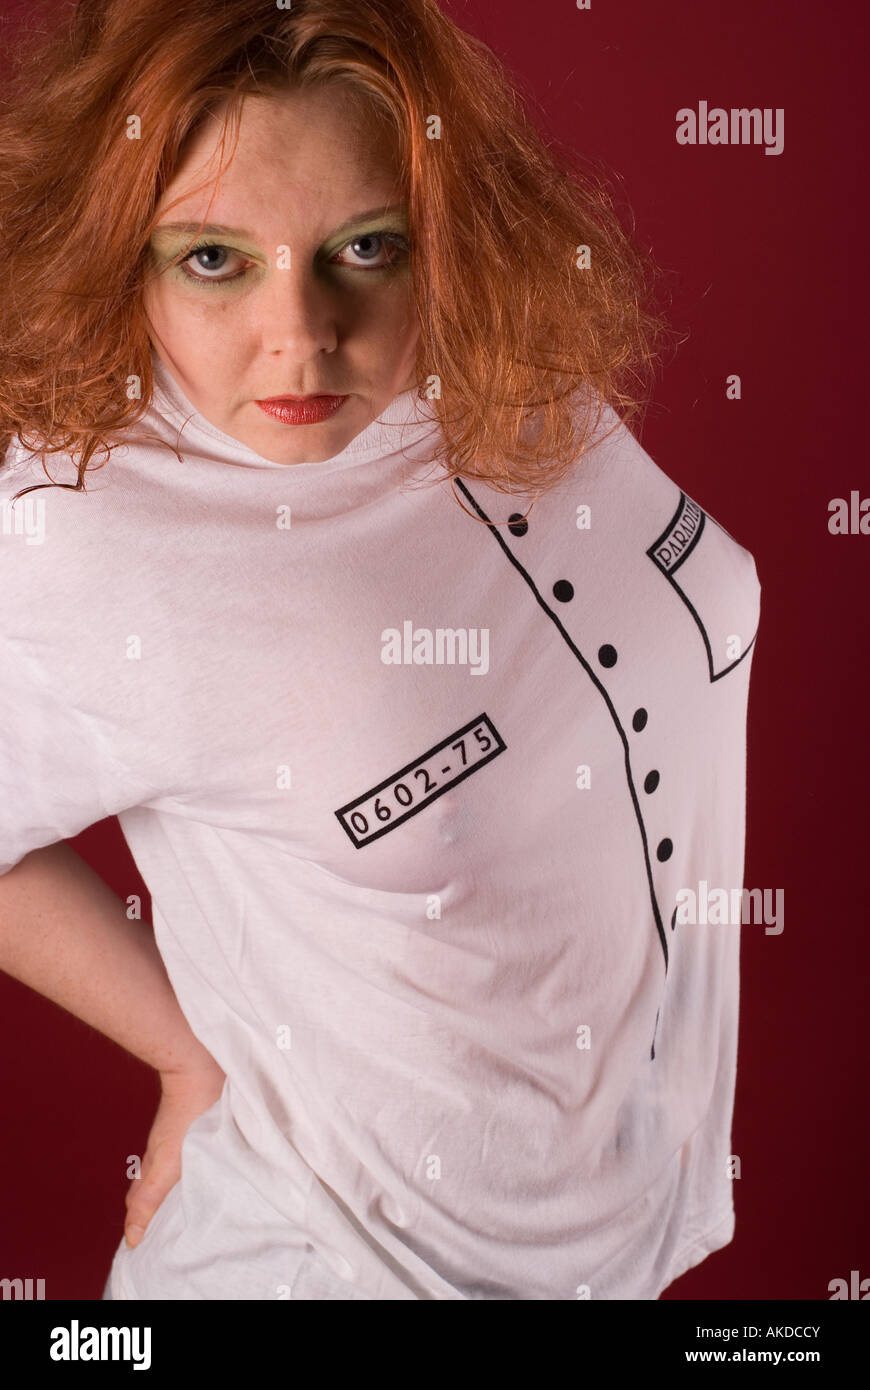 Portrait of a red haired woman in white shirt on a red background Stock Photo